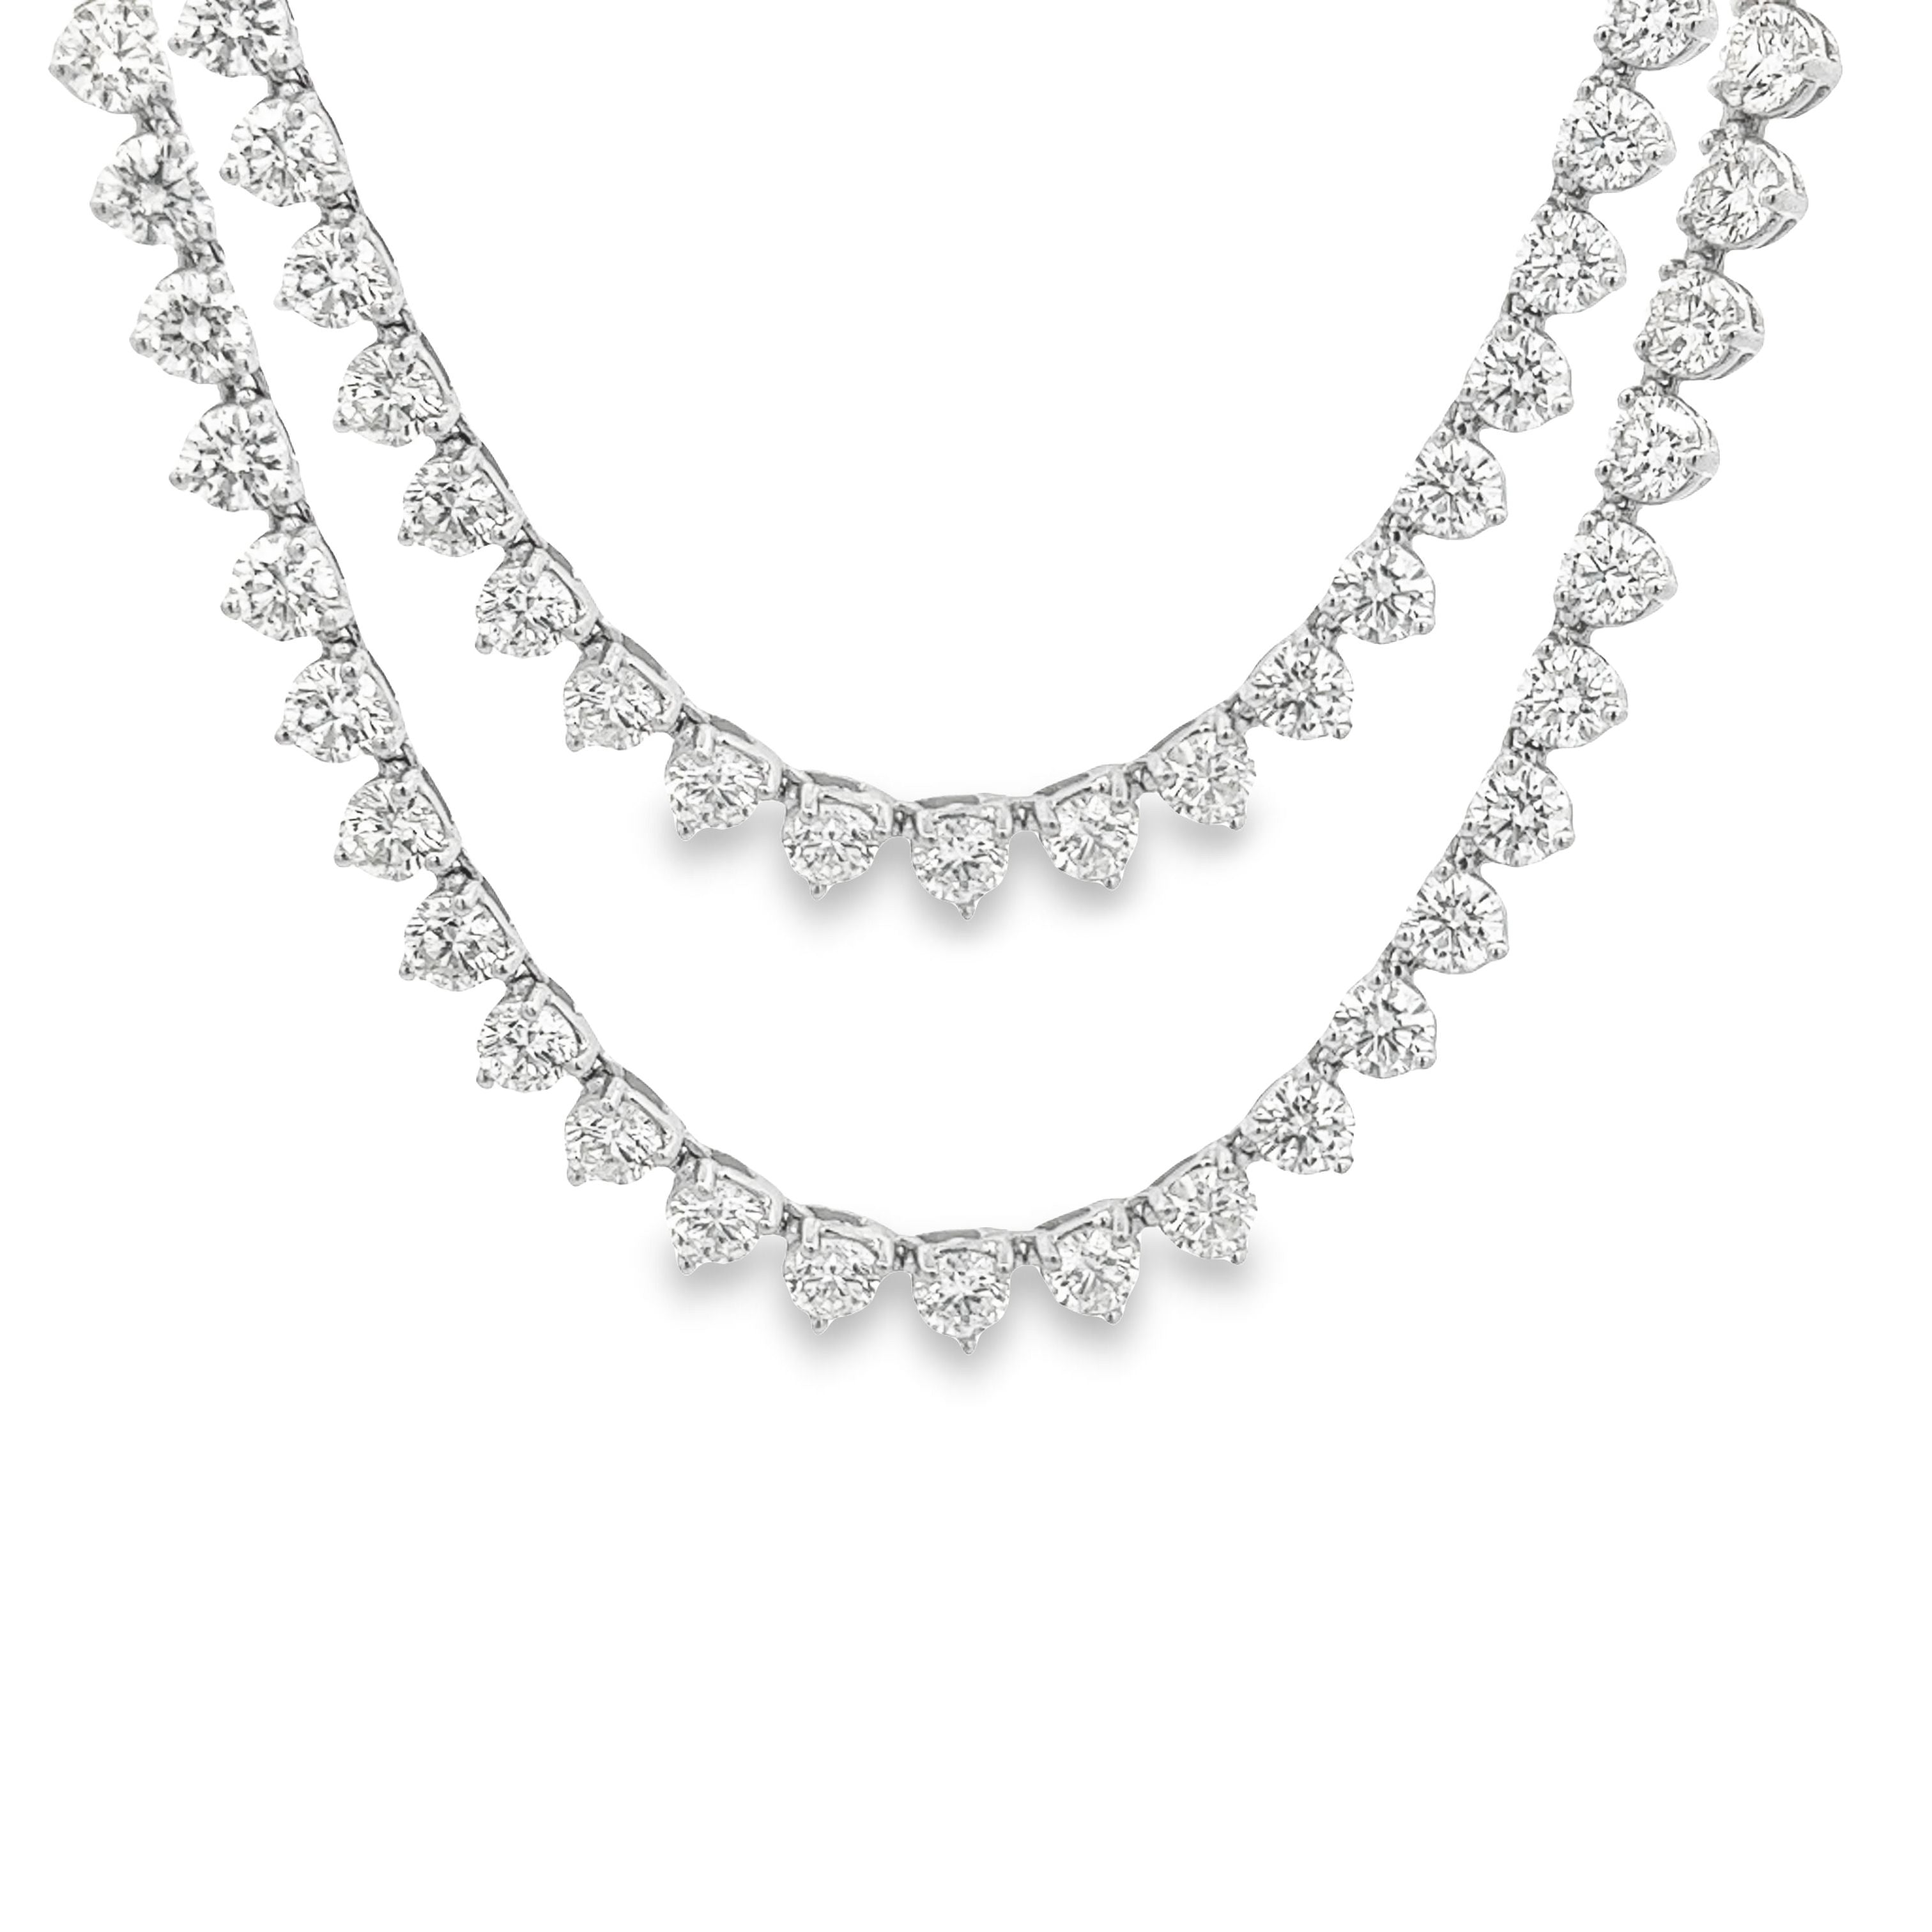 Buy Layered white rose statement necklace-new294 Online. – Odette